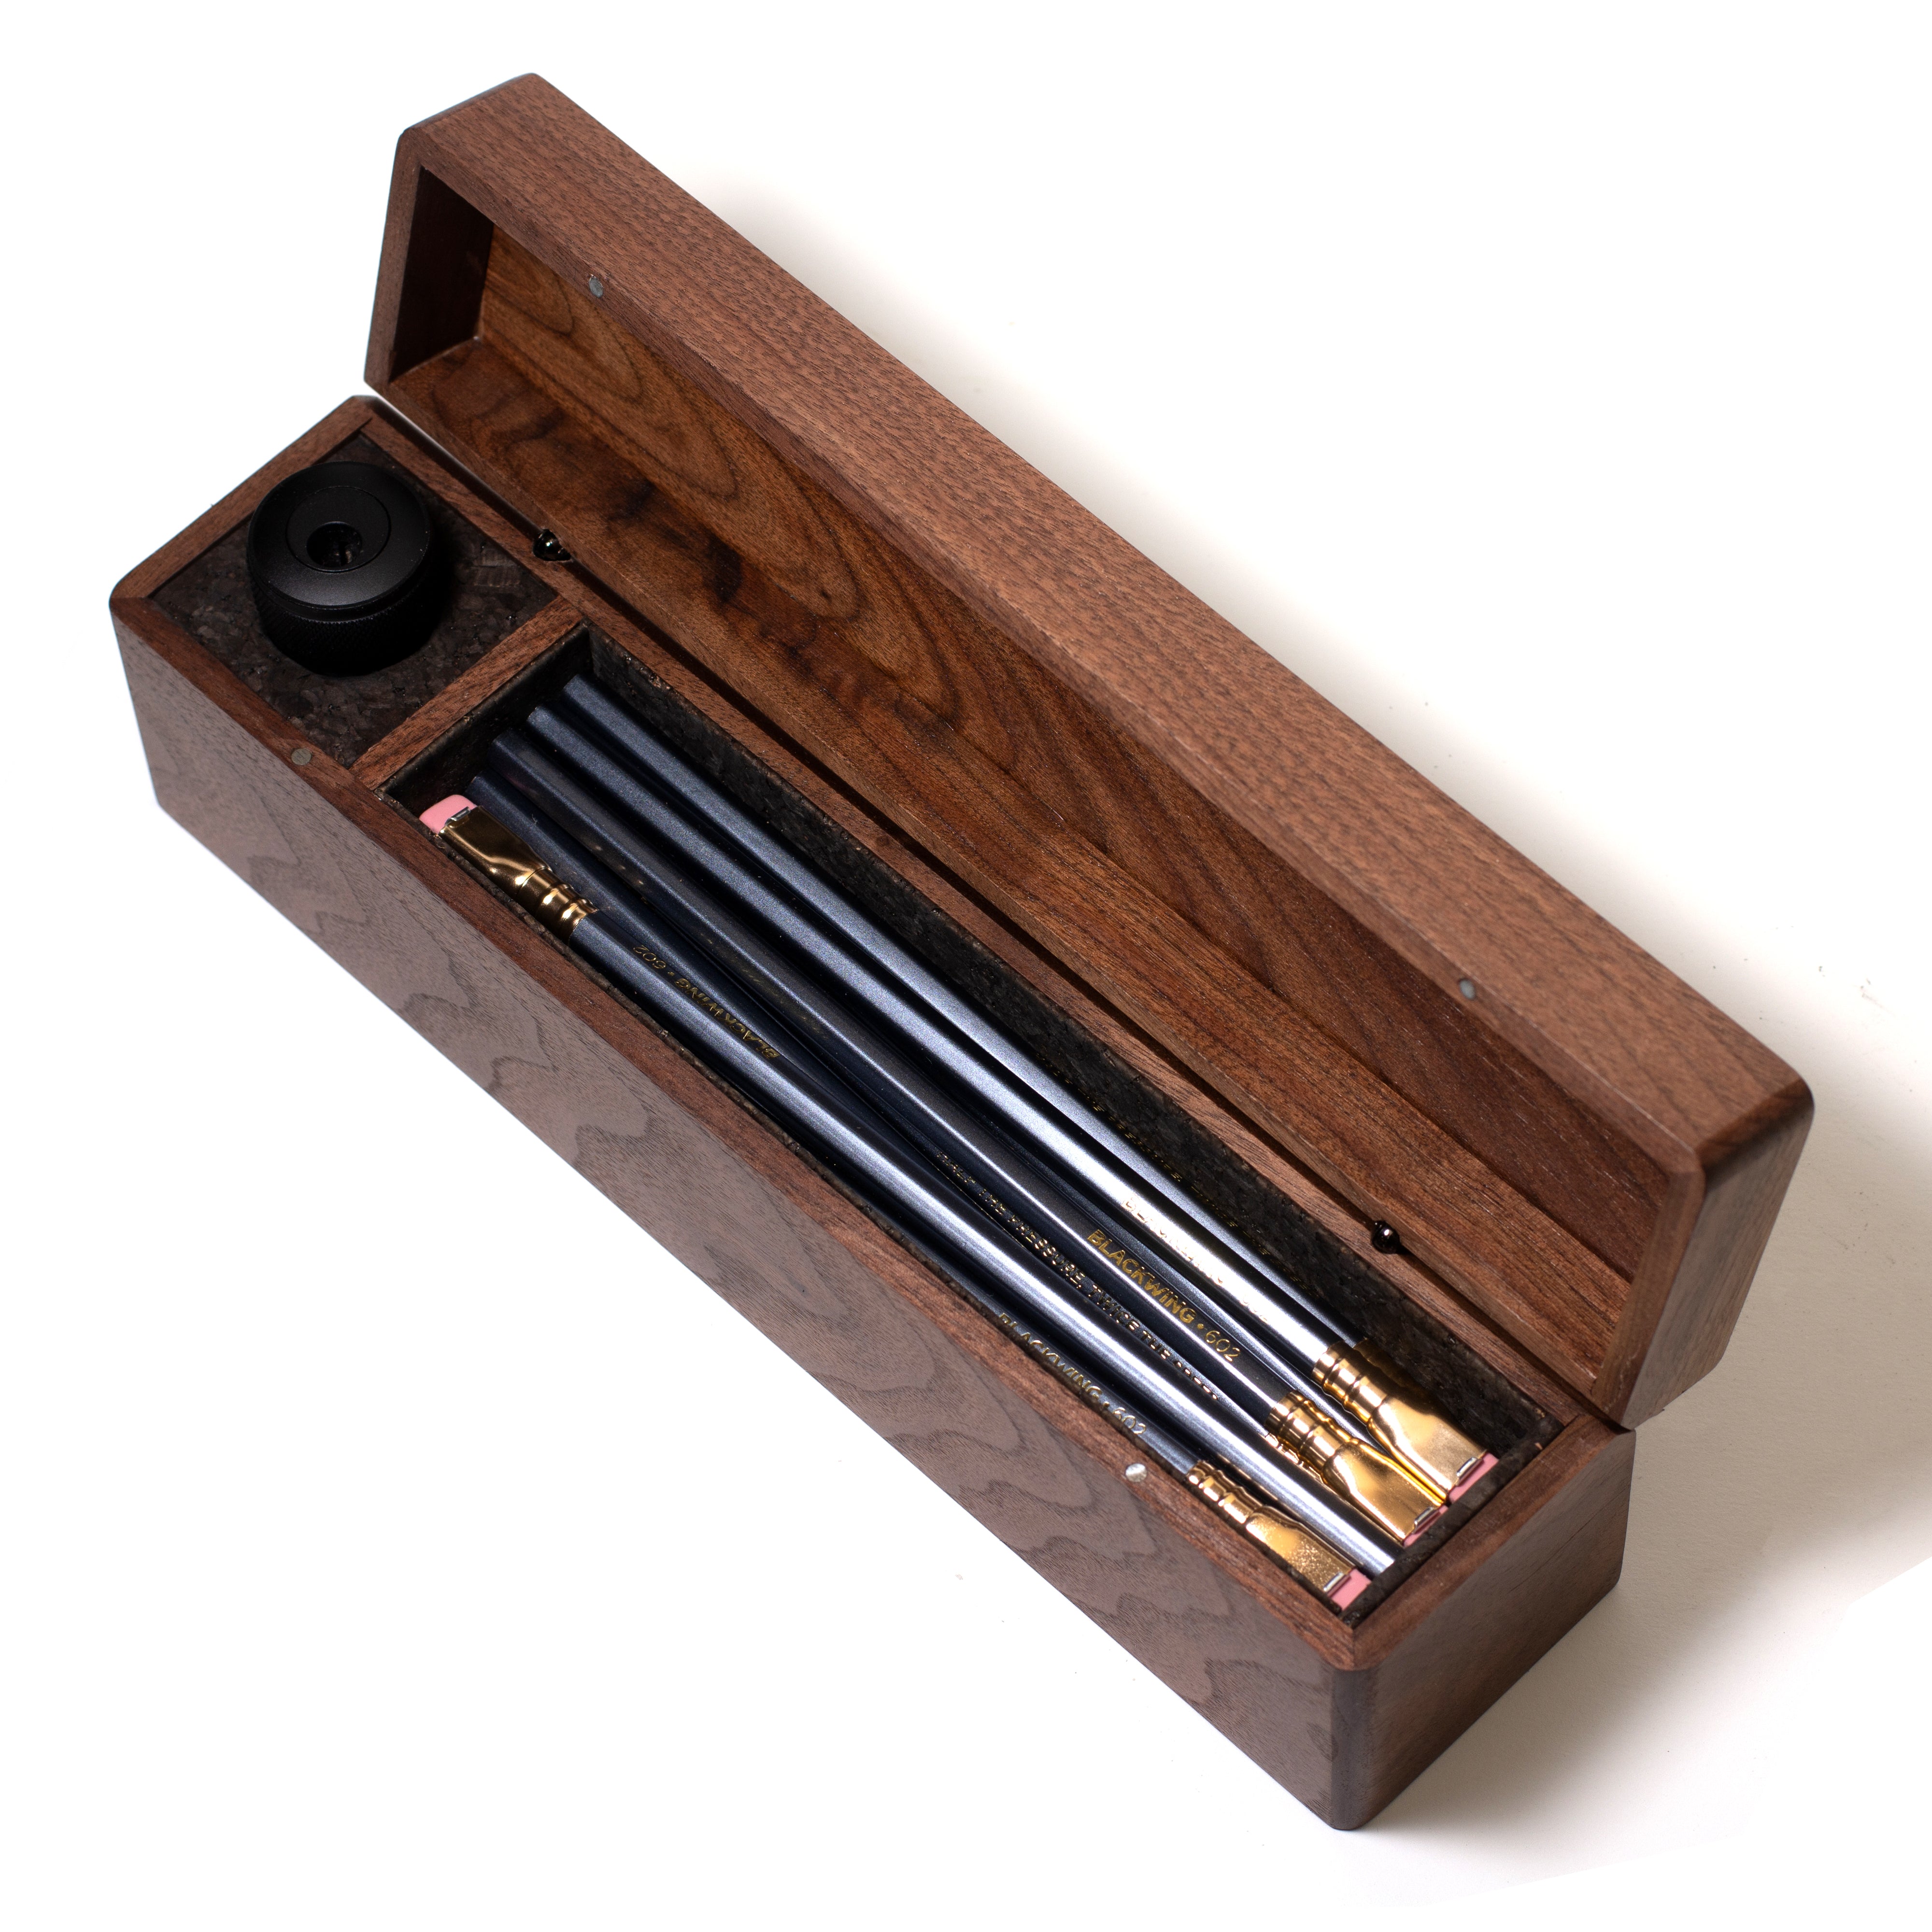 A Blackwing Walnut Box filled with Blackwing pencils.